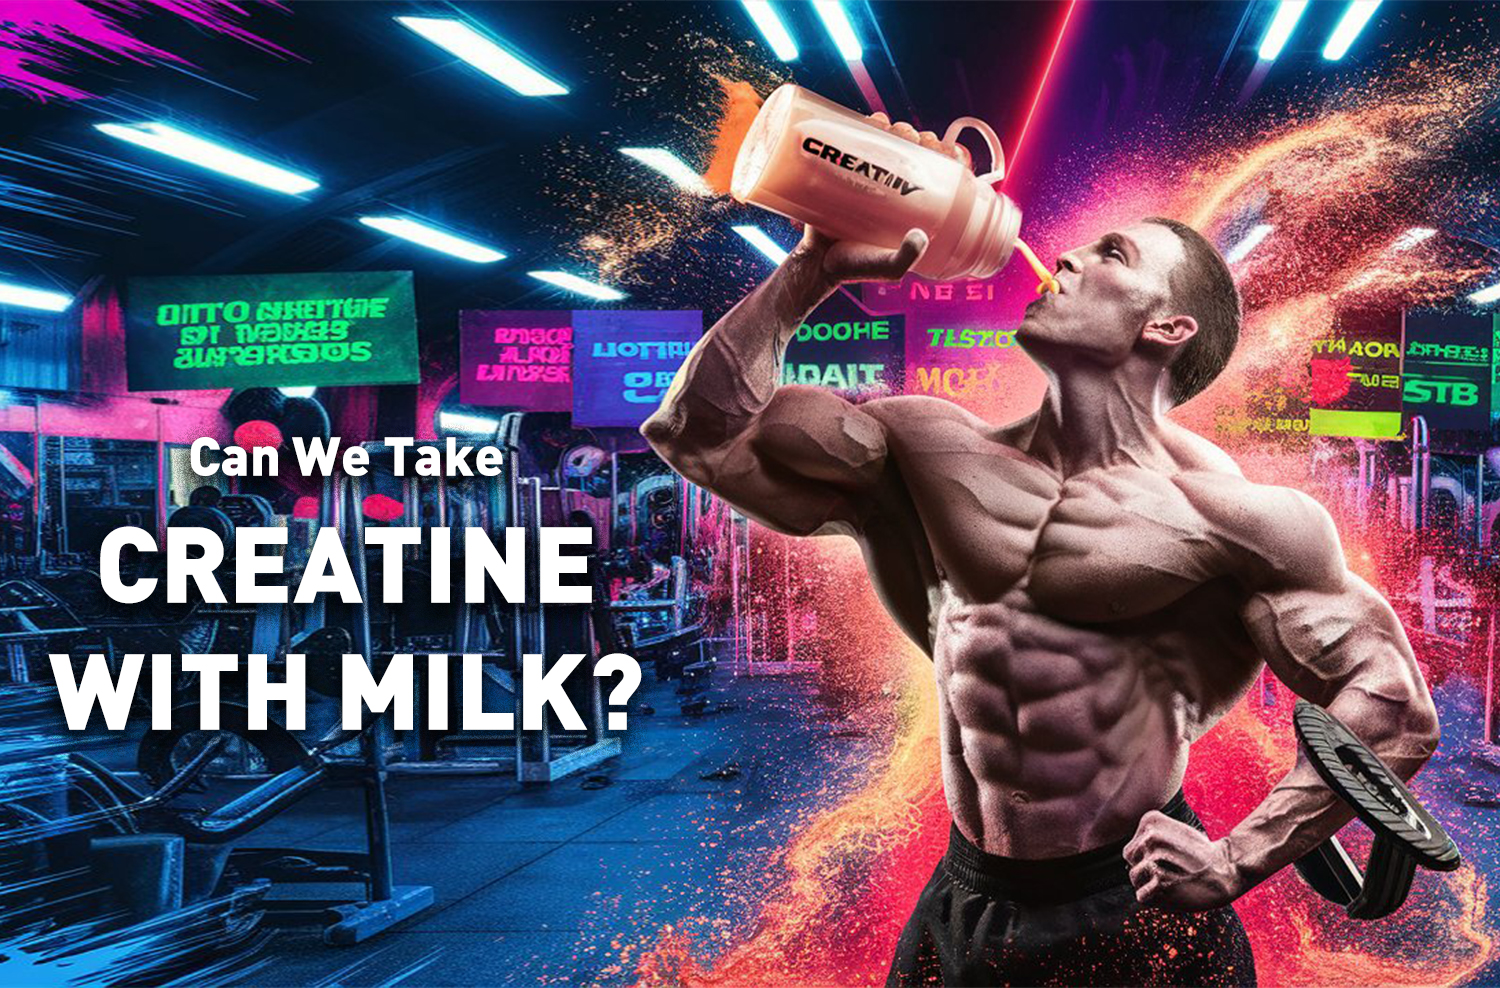 Can You Take Creatine With Milk? Find Answer Inside!